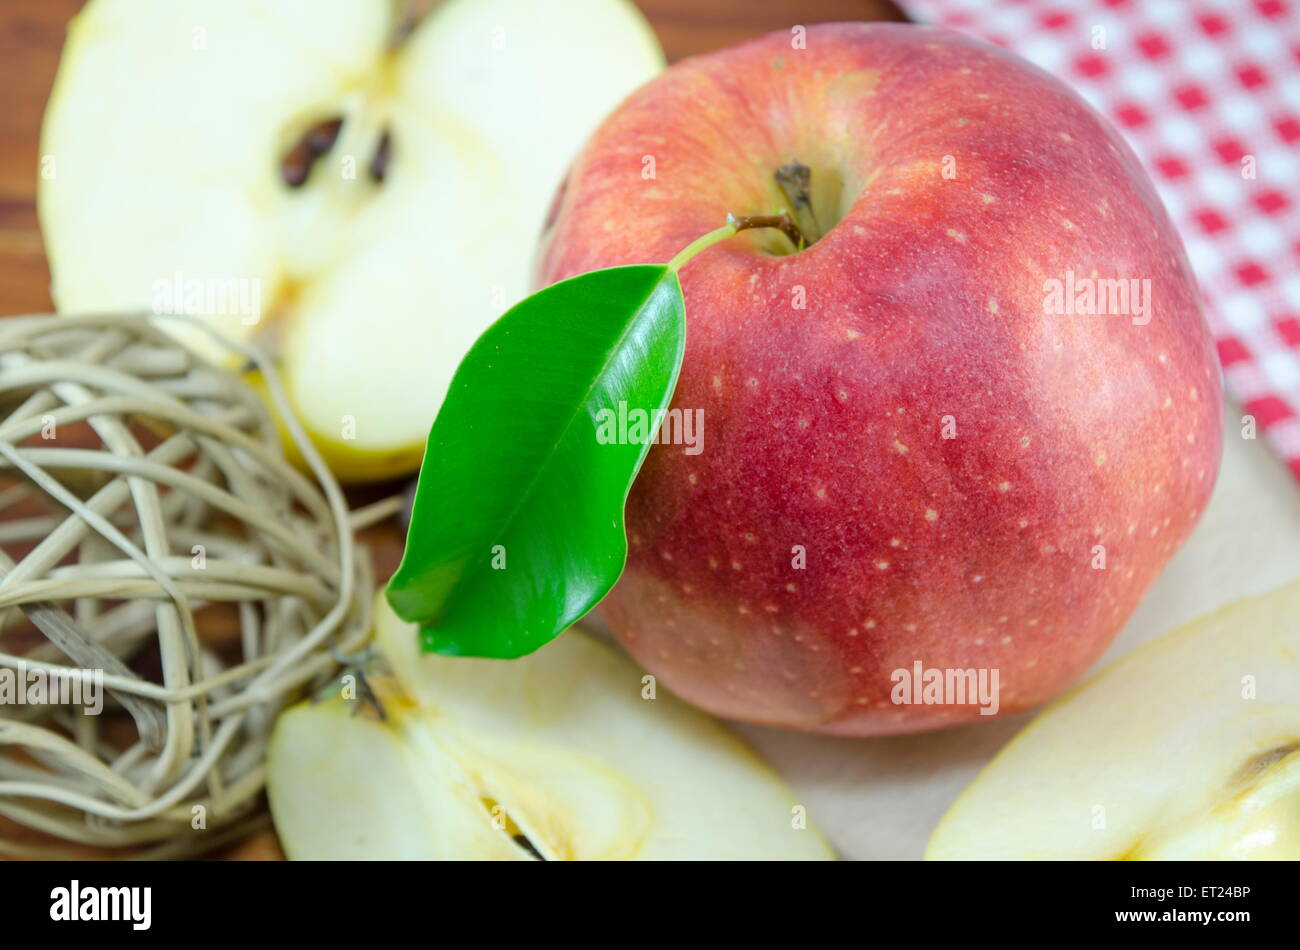 Halved and whole red apple on a table with a handmade decoration Stock Photo